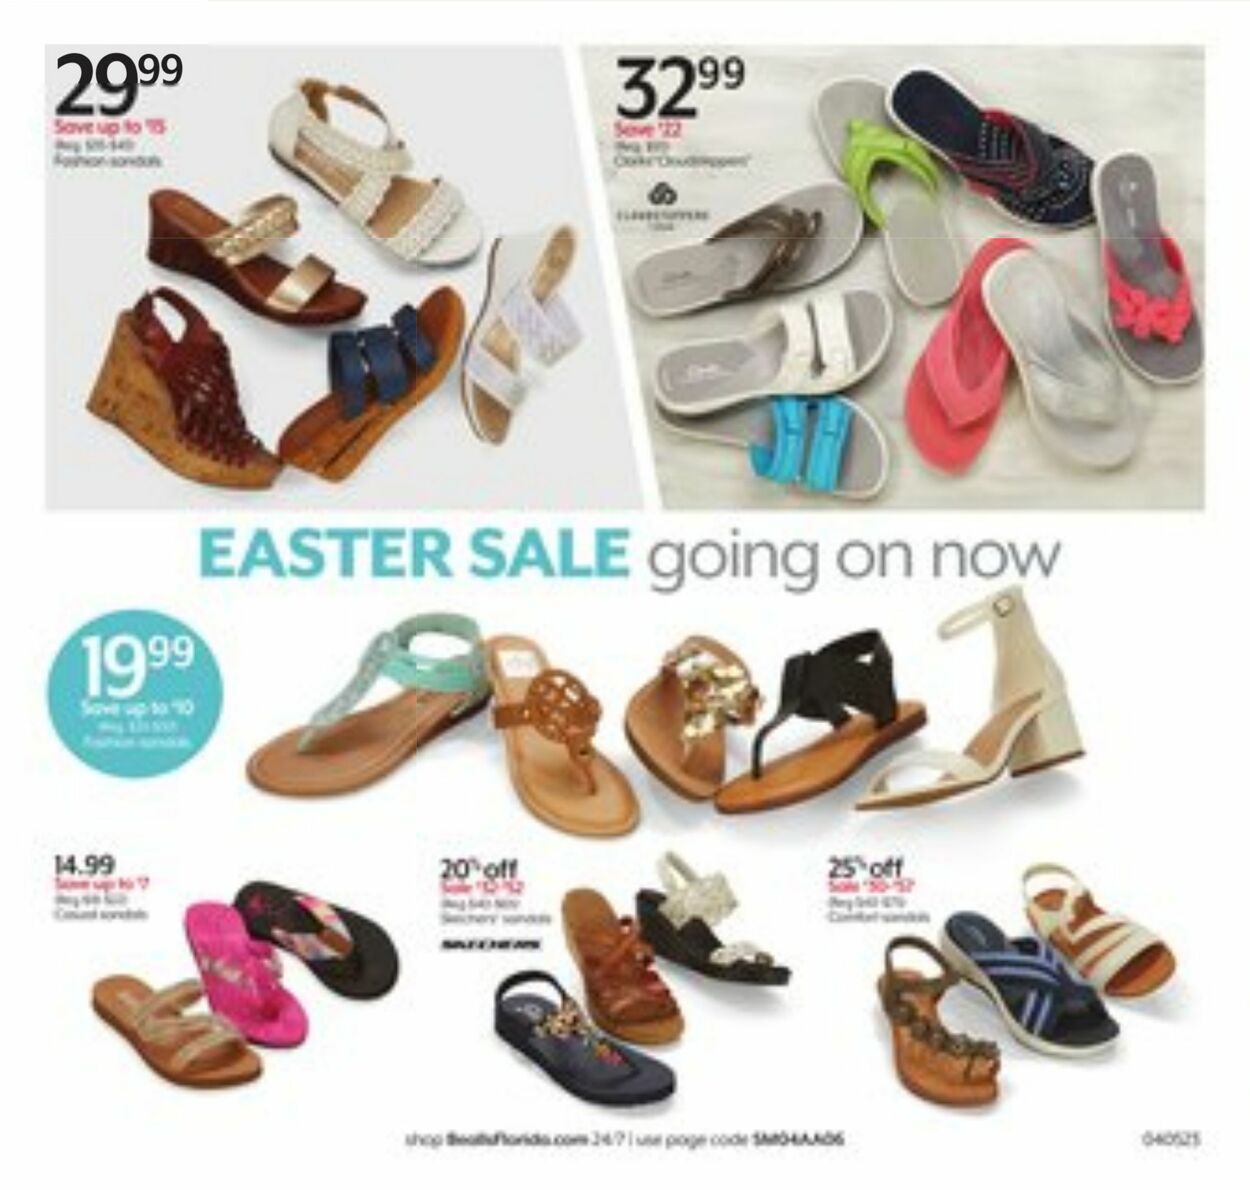 Bealls Florida Ad from 04/05/2023